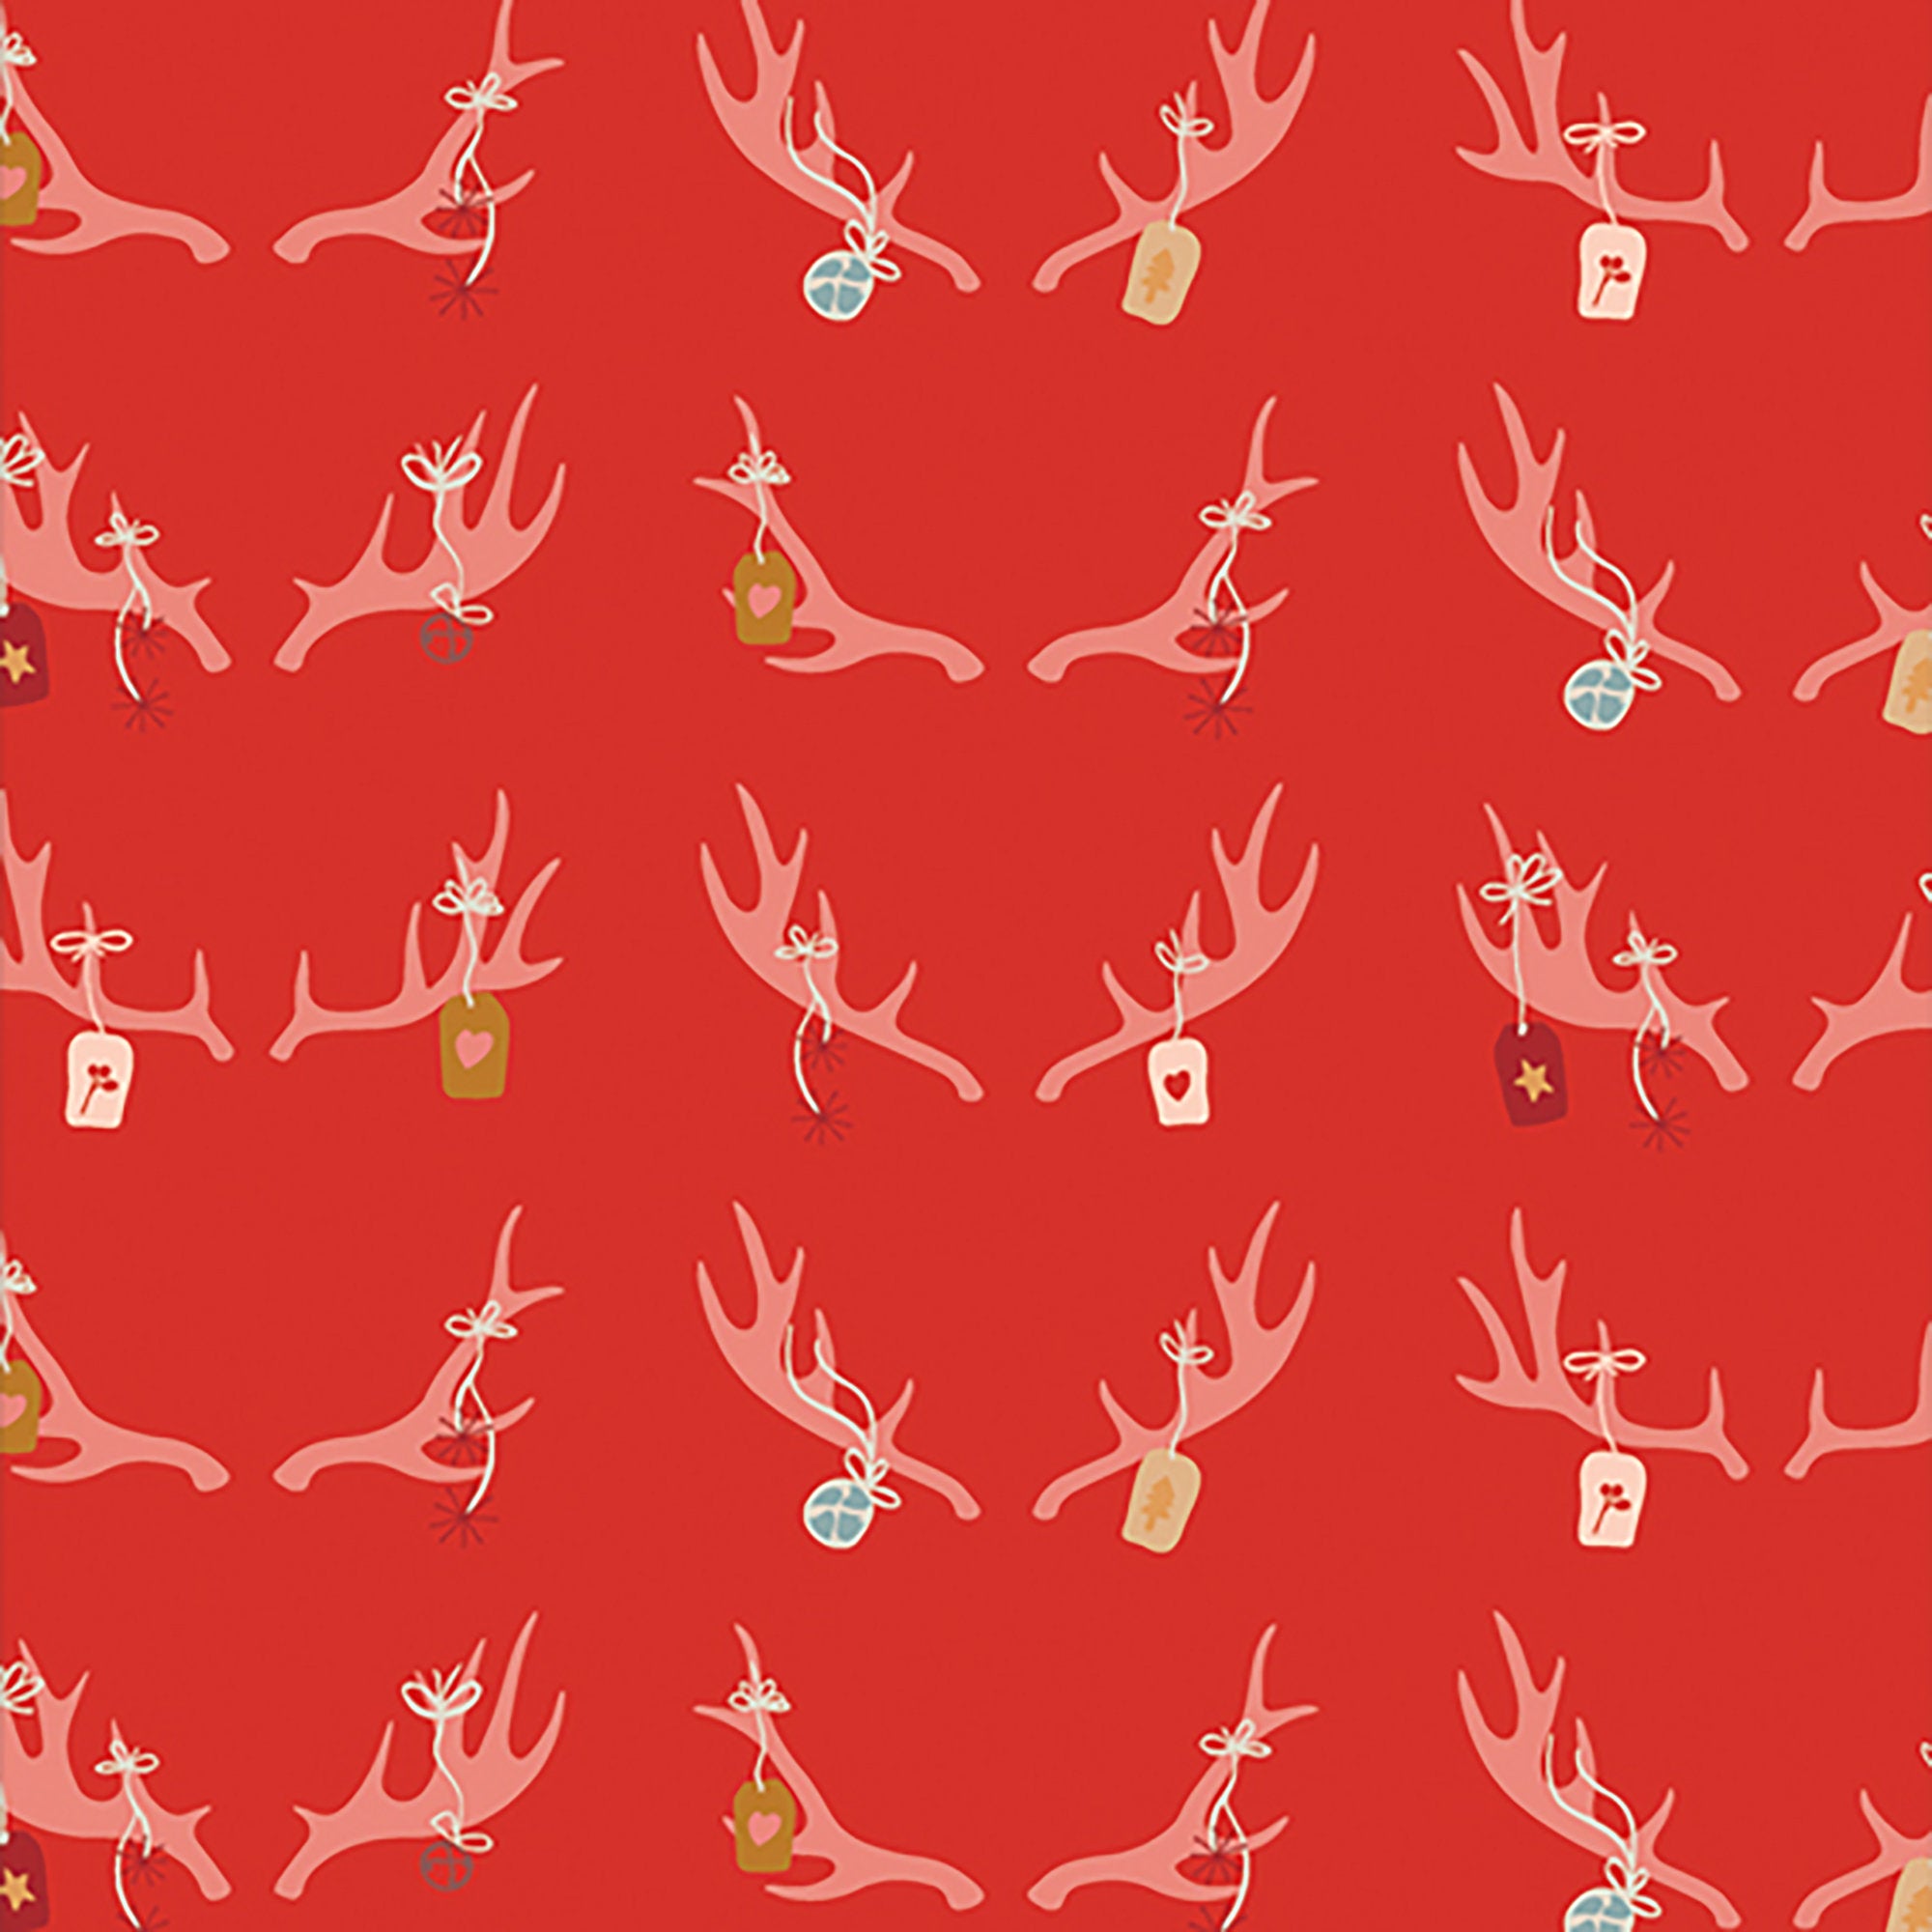 Cozy & Magical - Cheerful Antlers Fabric